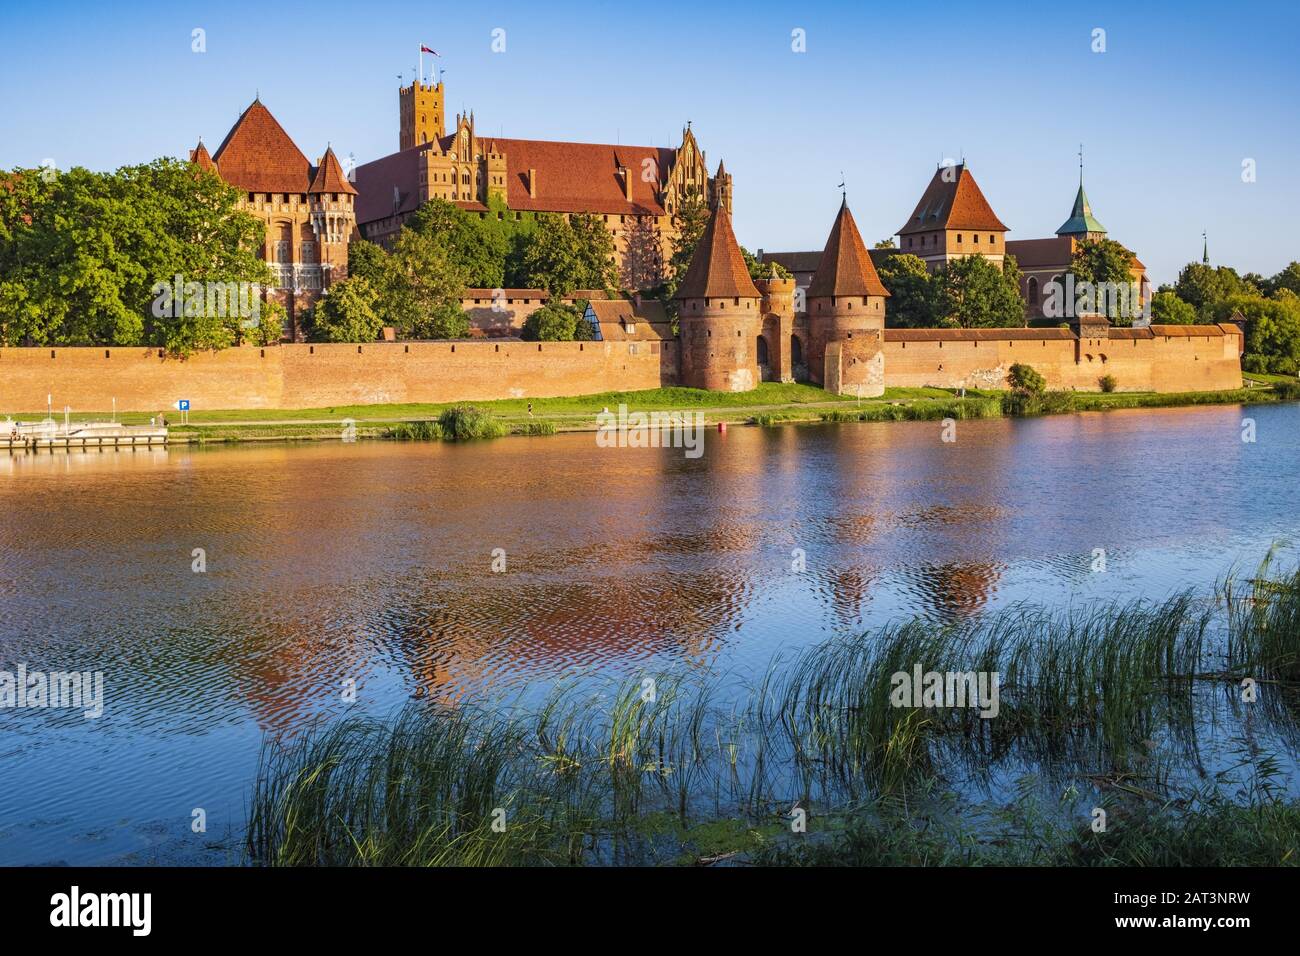 Malbork, Pomerania / Poland - 2019/08/24: Panoramic view of the defense walls and towers of the Medieval Teutonic Order Castle in Malbork, Poland from across the Nogat river Stock Photo